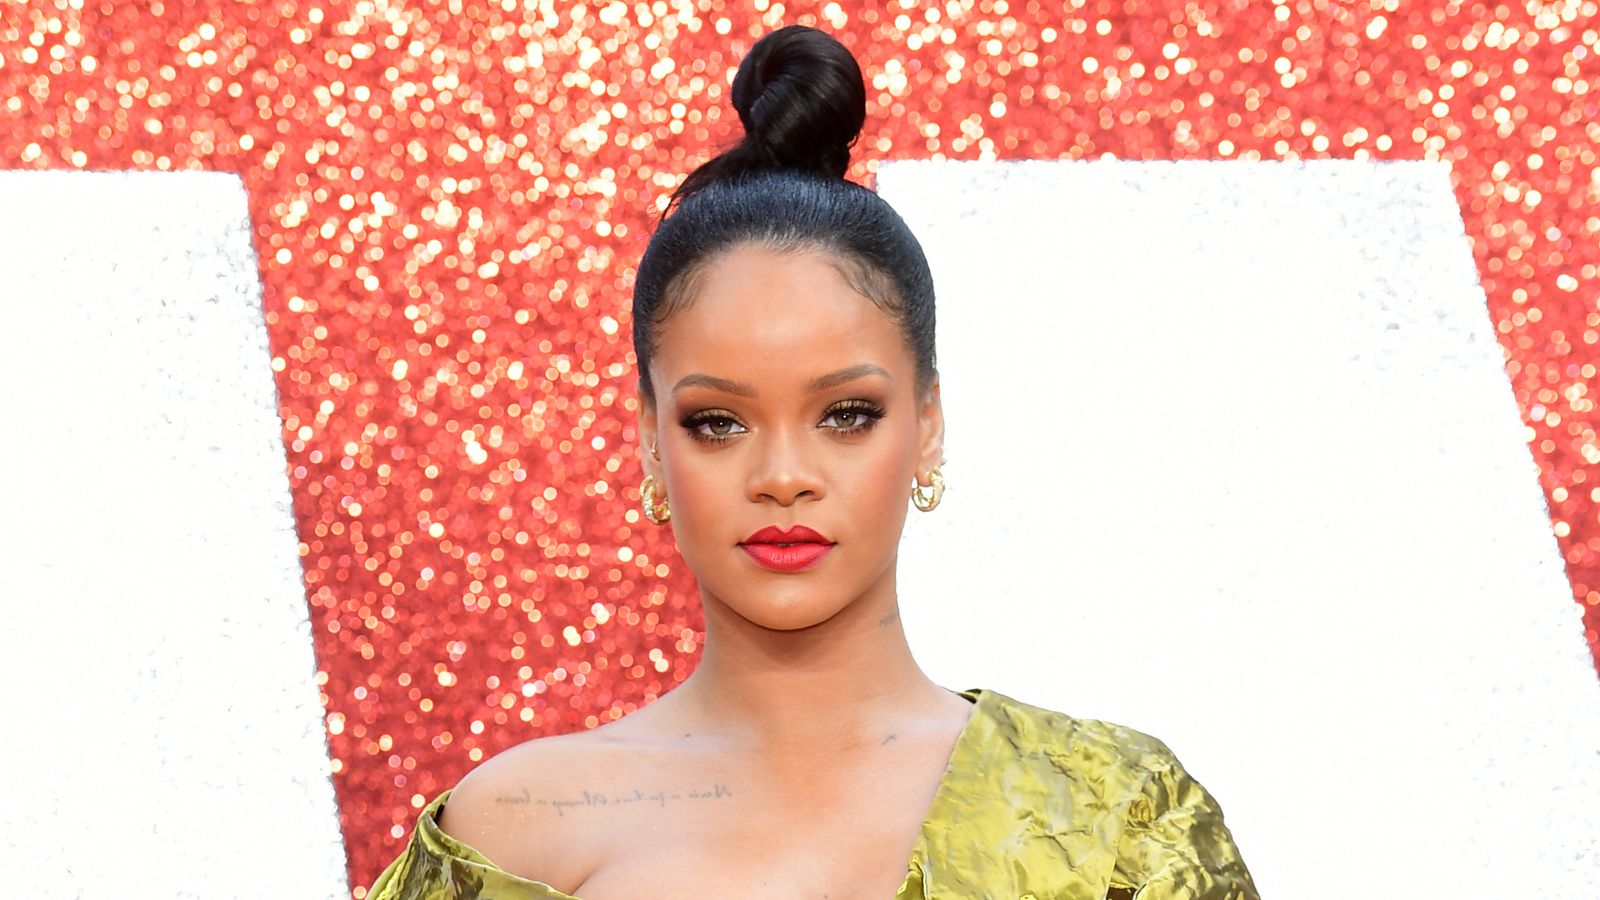 Rihanna makes her debut on 'Forbes' annual billionaires list